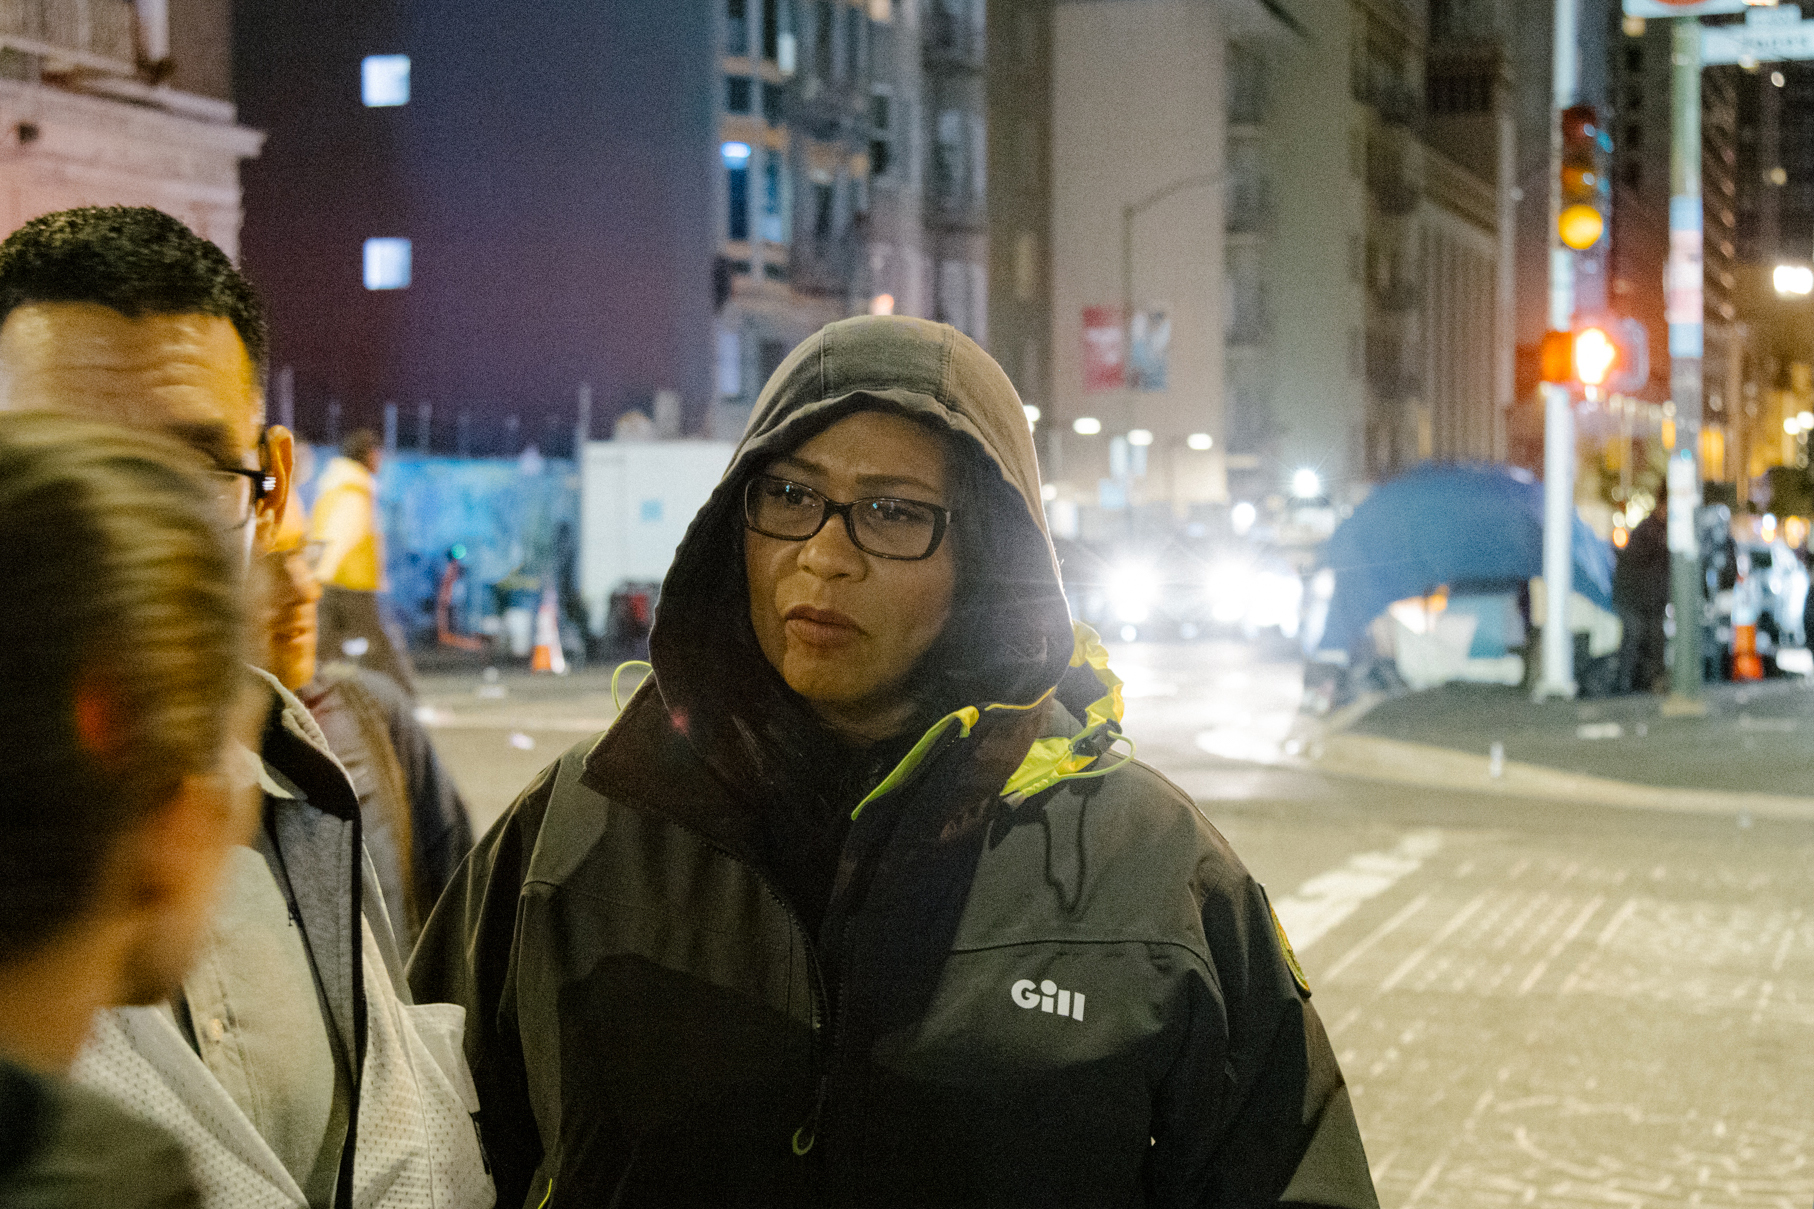 A person in a hooded jacket and glasses stands on a city street at night, with other people and car lights visible.